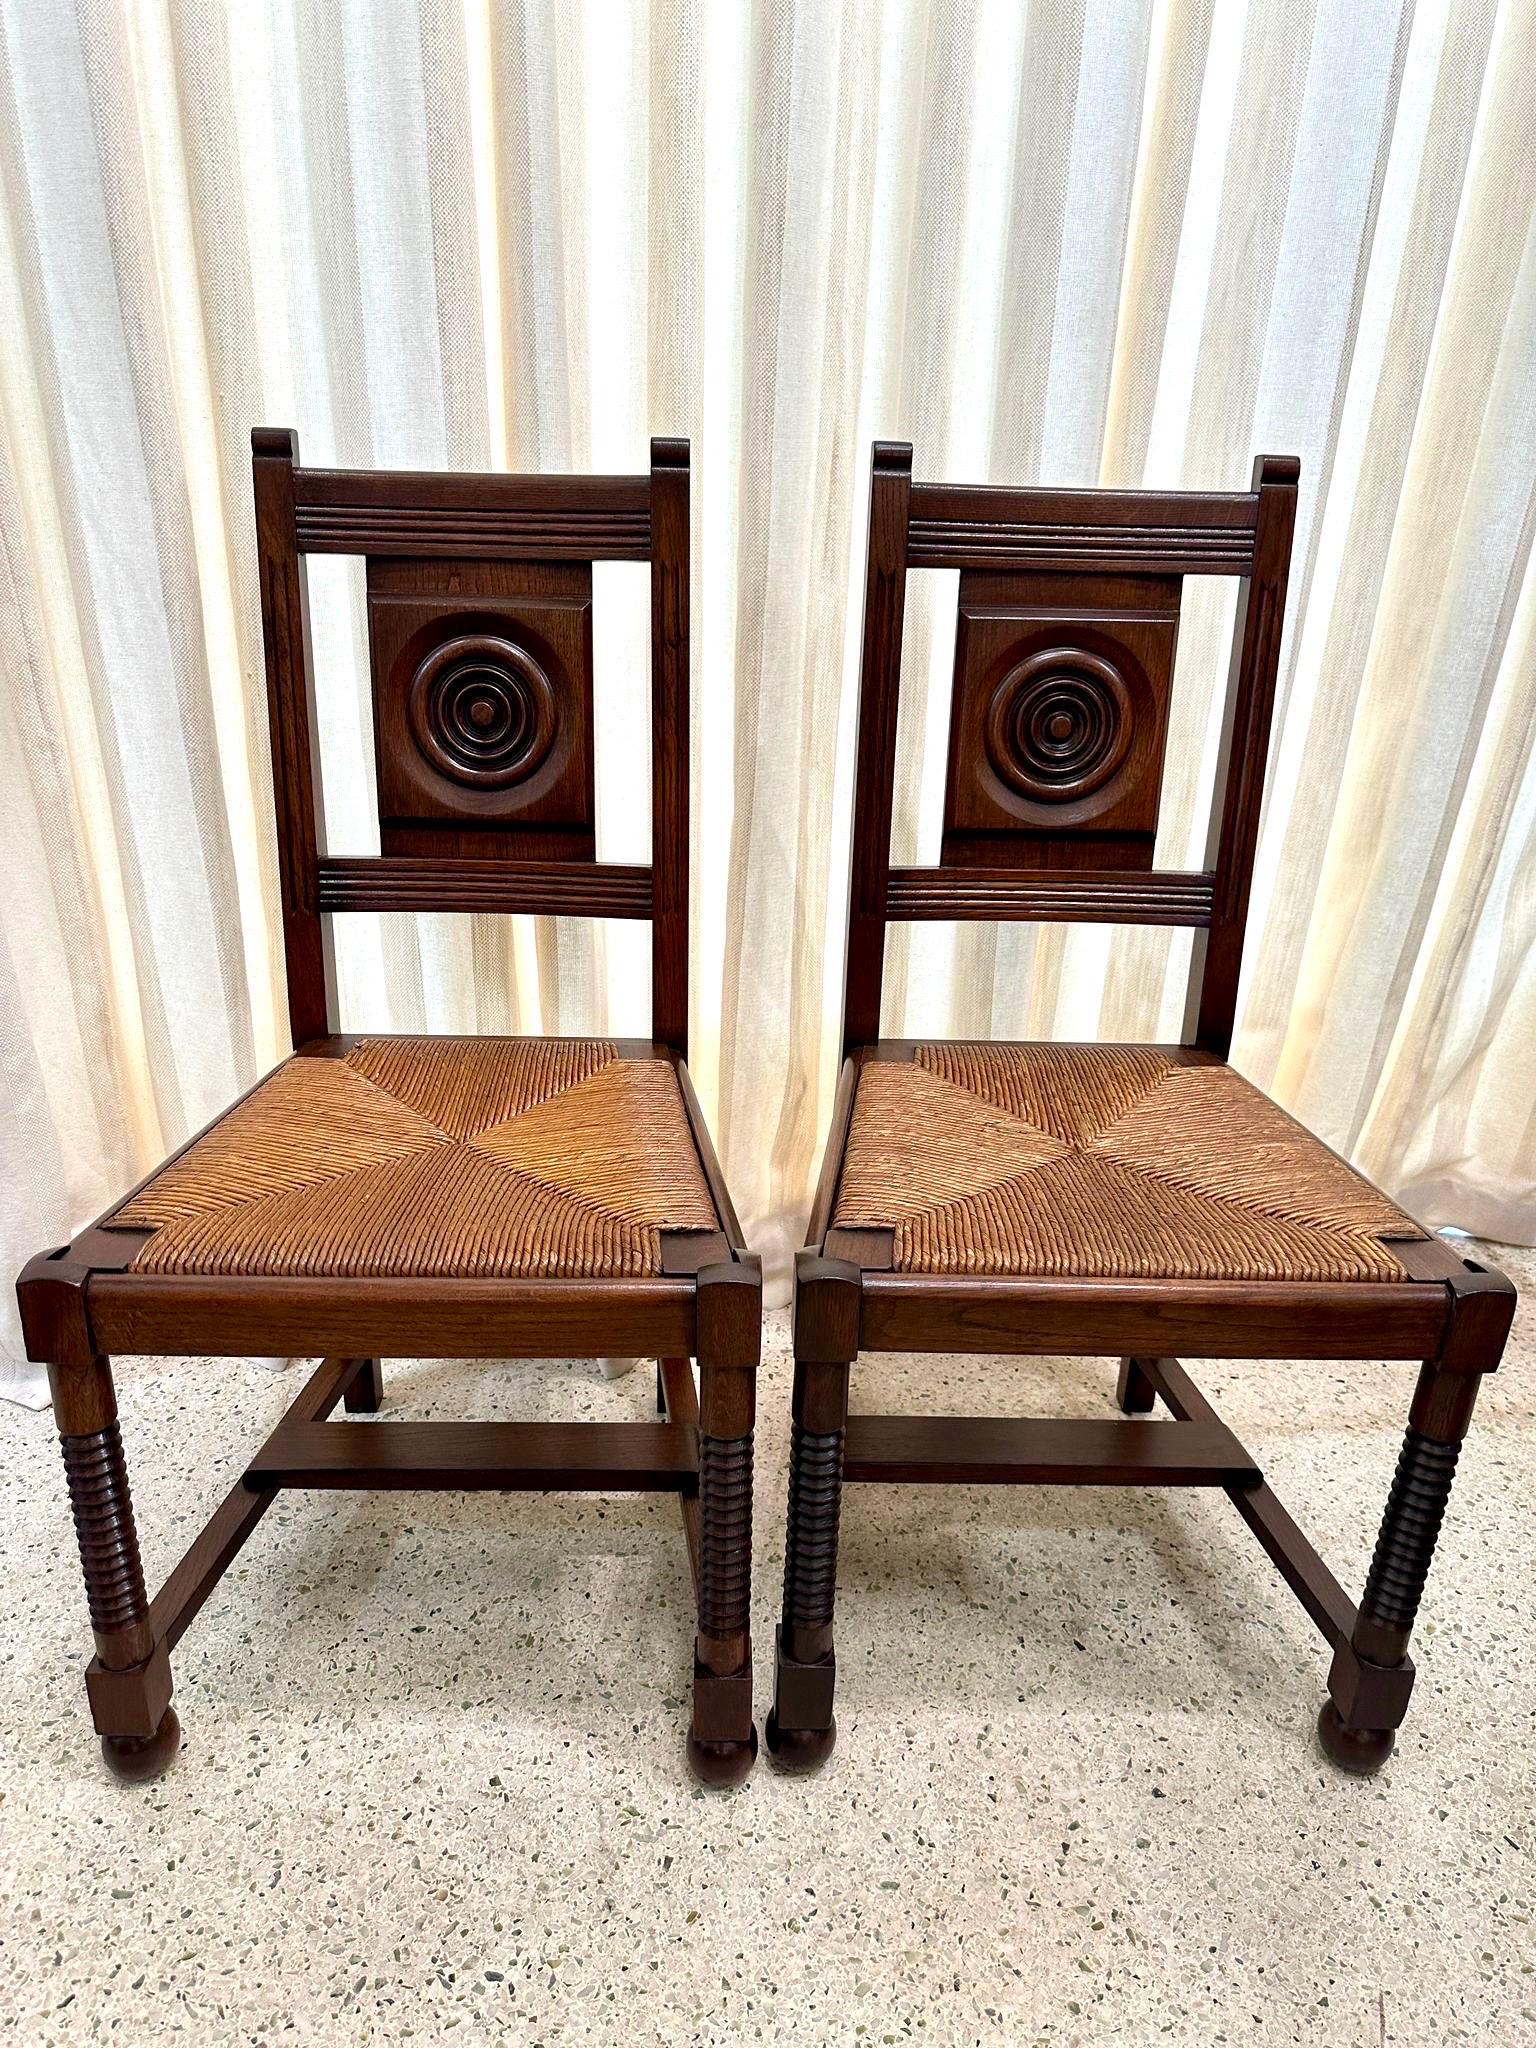 Amazingly restored vintage Set of 4 Charles Dudouyt Oak Chairs with rush seats.  NOTE:  we also have the matching dining table with extensions available in separate listing.  Please inquire.

A bit of timeless sophistication with this set of 4